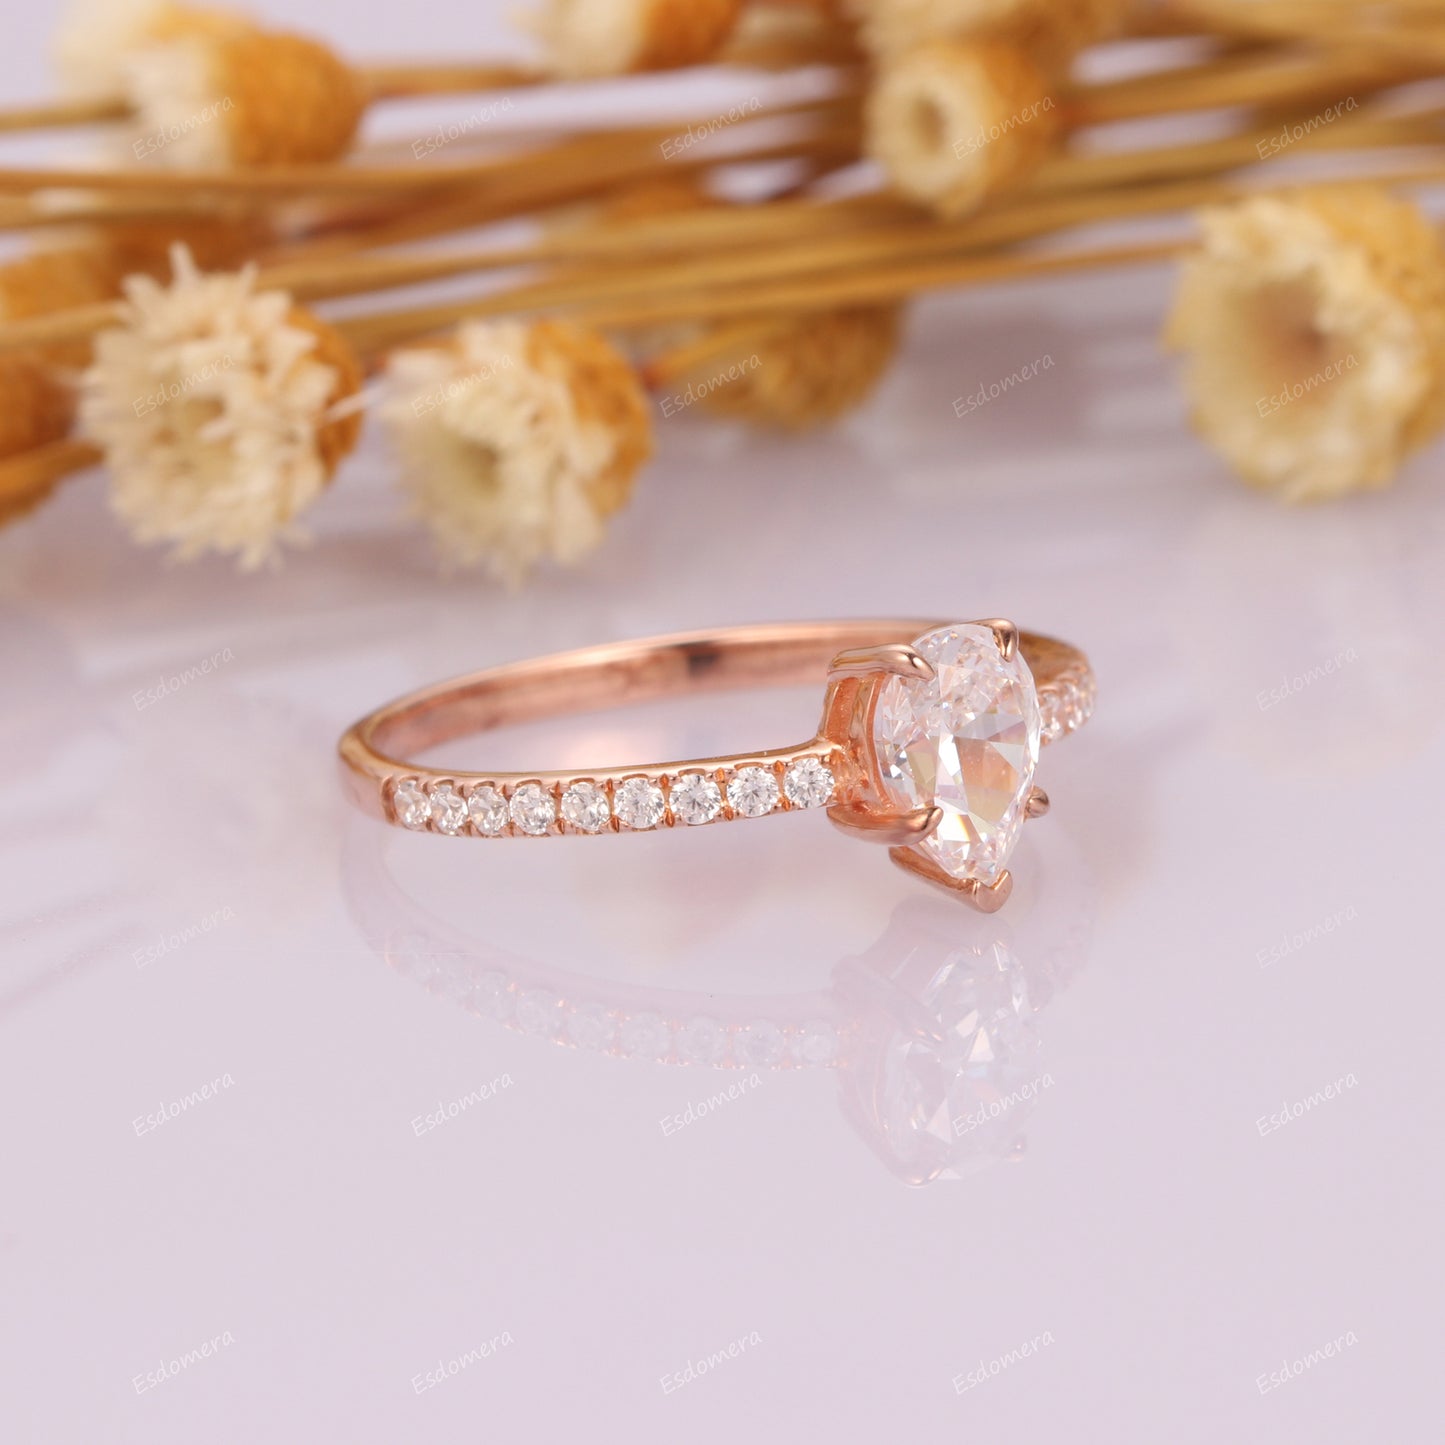 5 Prongs 0.8CT Pear Cut Moissanite Engagement Ring, 14k Rose Gold Anniversary Ring For Her, Half Eternity Bridal Ring